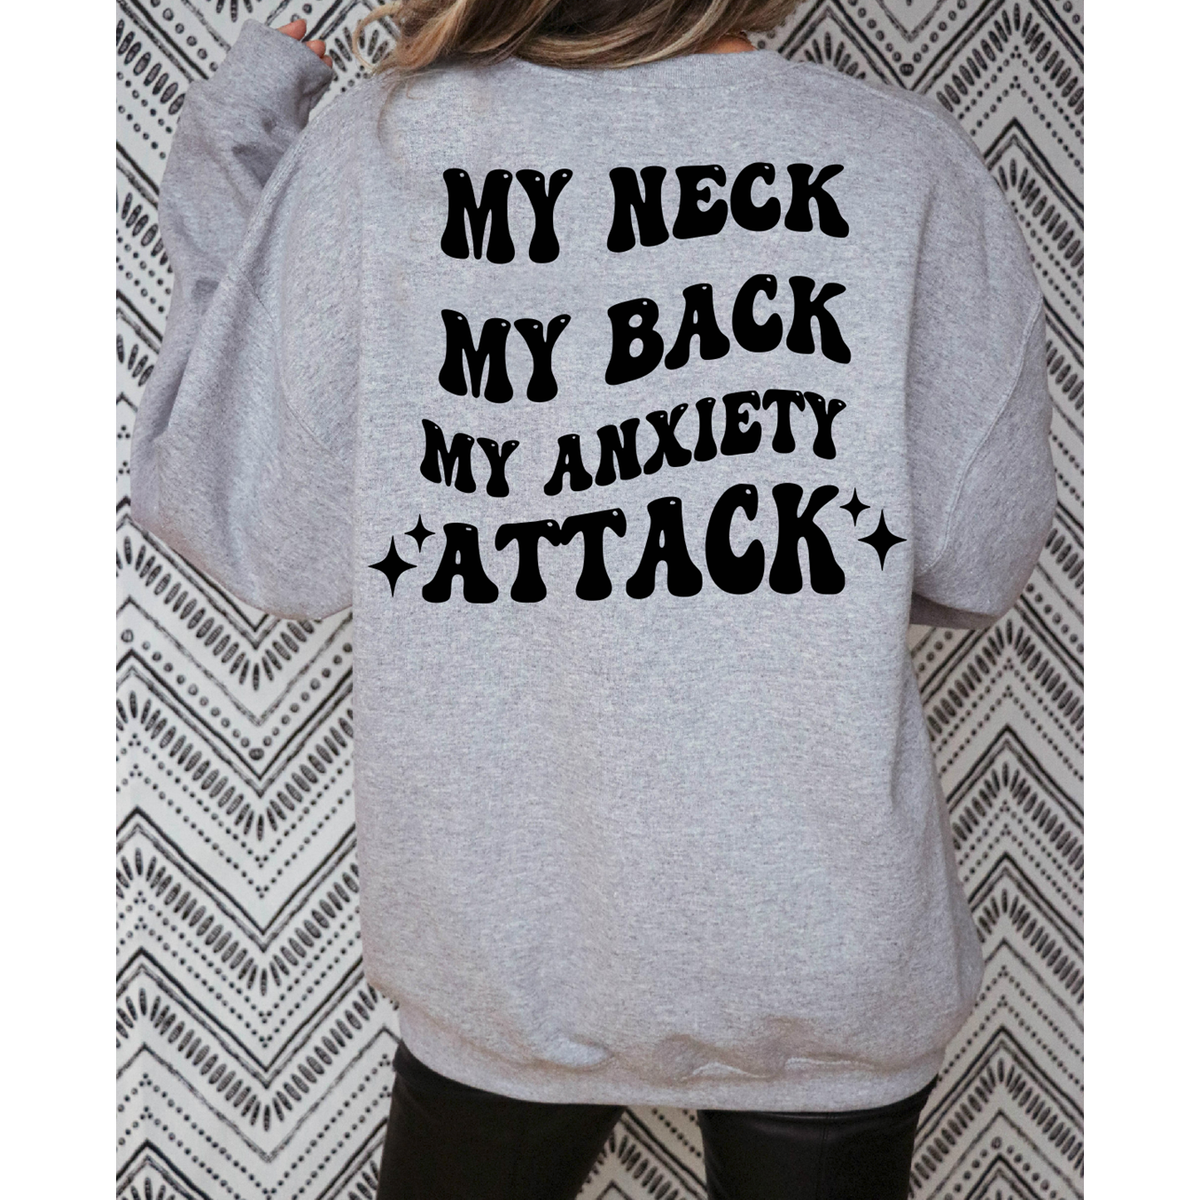 My Neck My back My Anxiety Attack tee or sweatshirt